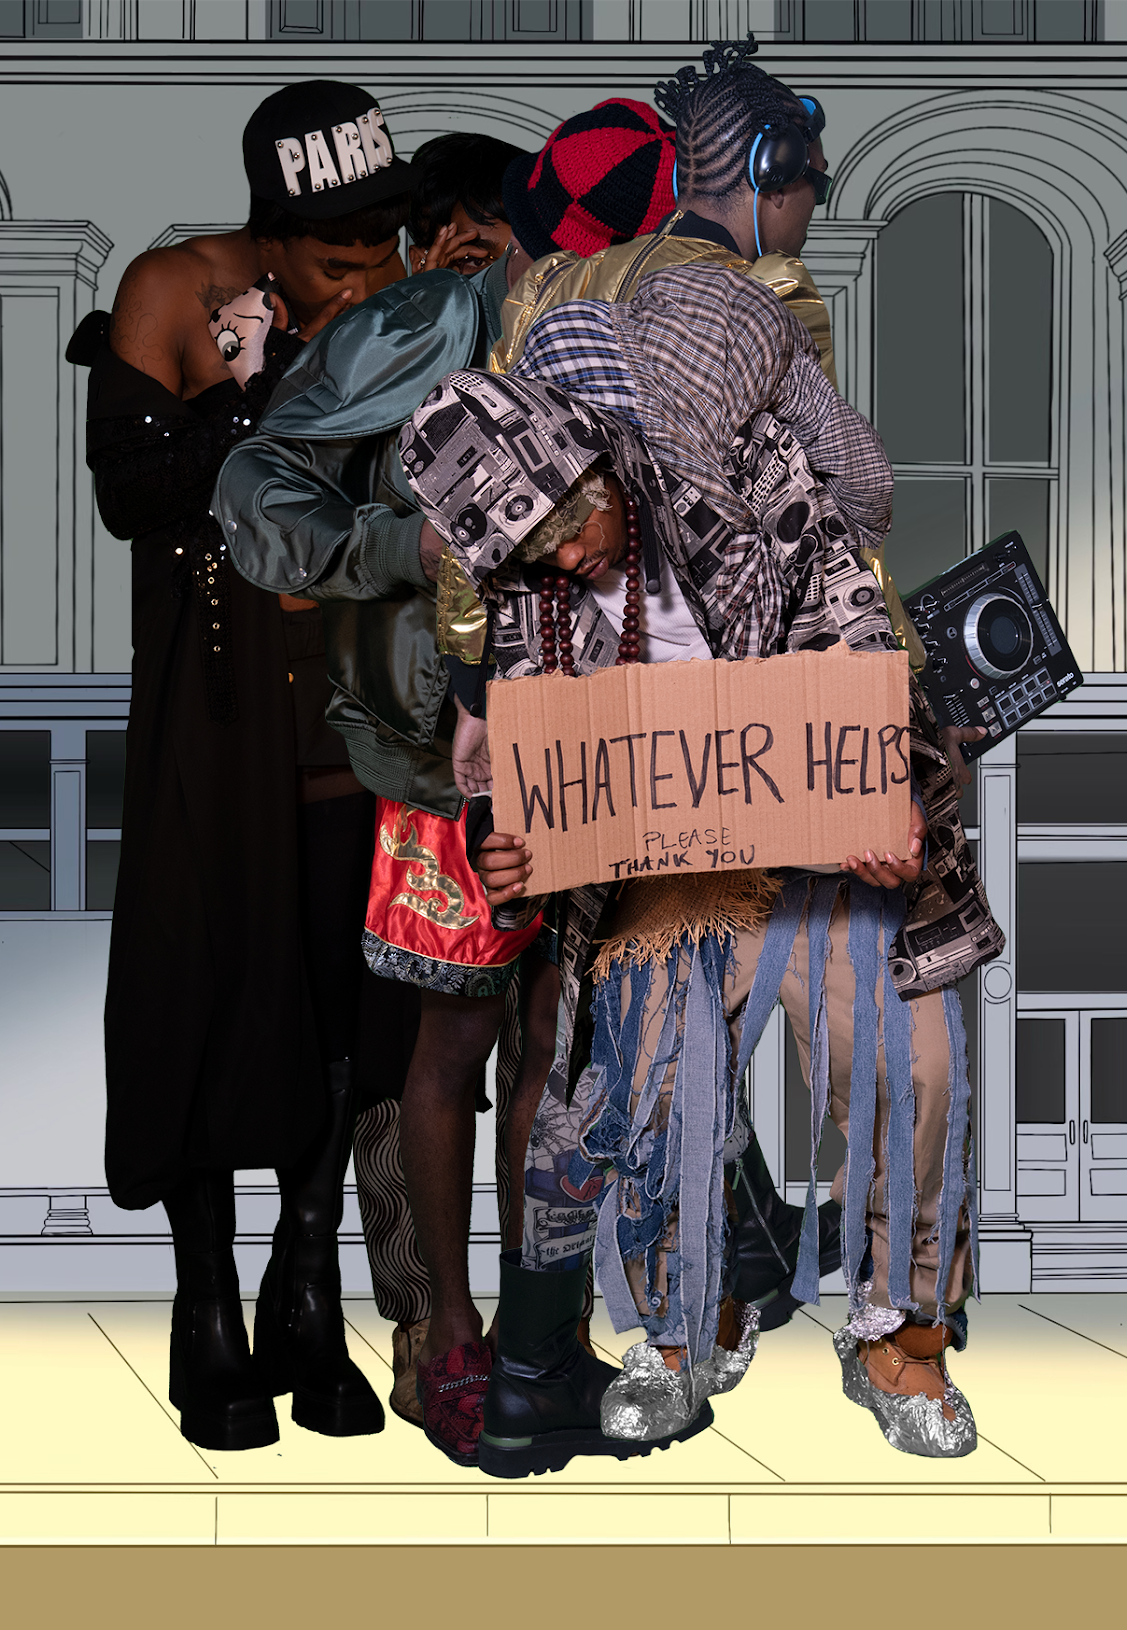 Five Black people, dressed in eccentric clothing, overlapped onto a digitally-drawn cityscape background. The person in front, wearing tan boots wrapped in tin foil, holds a cardboard sign that reads “Whatever Helps. Please. Thank You.”